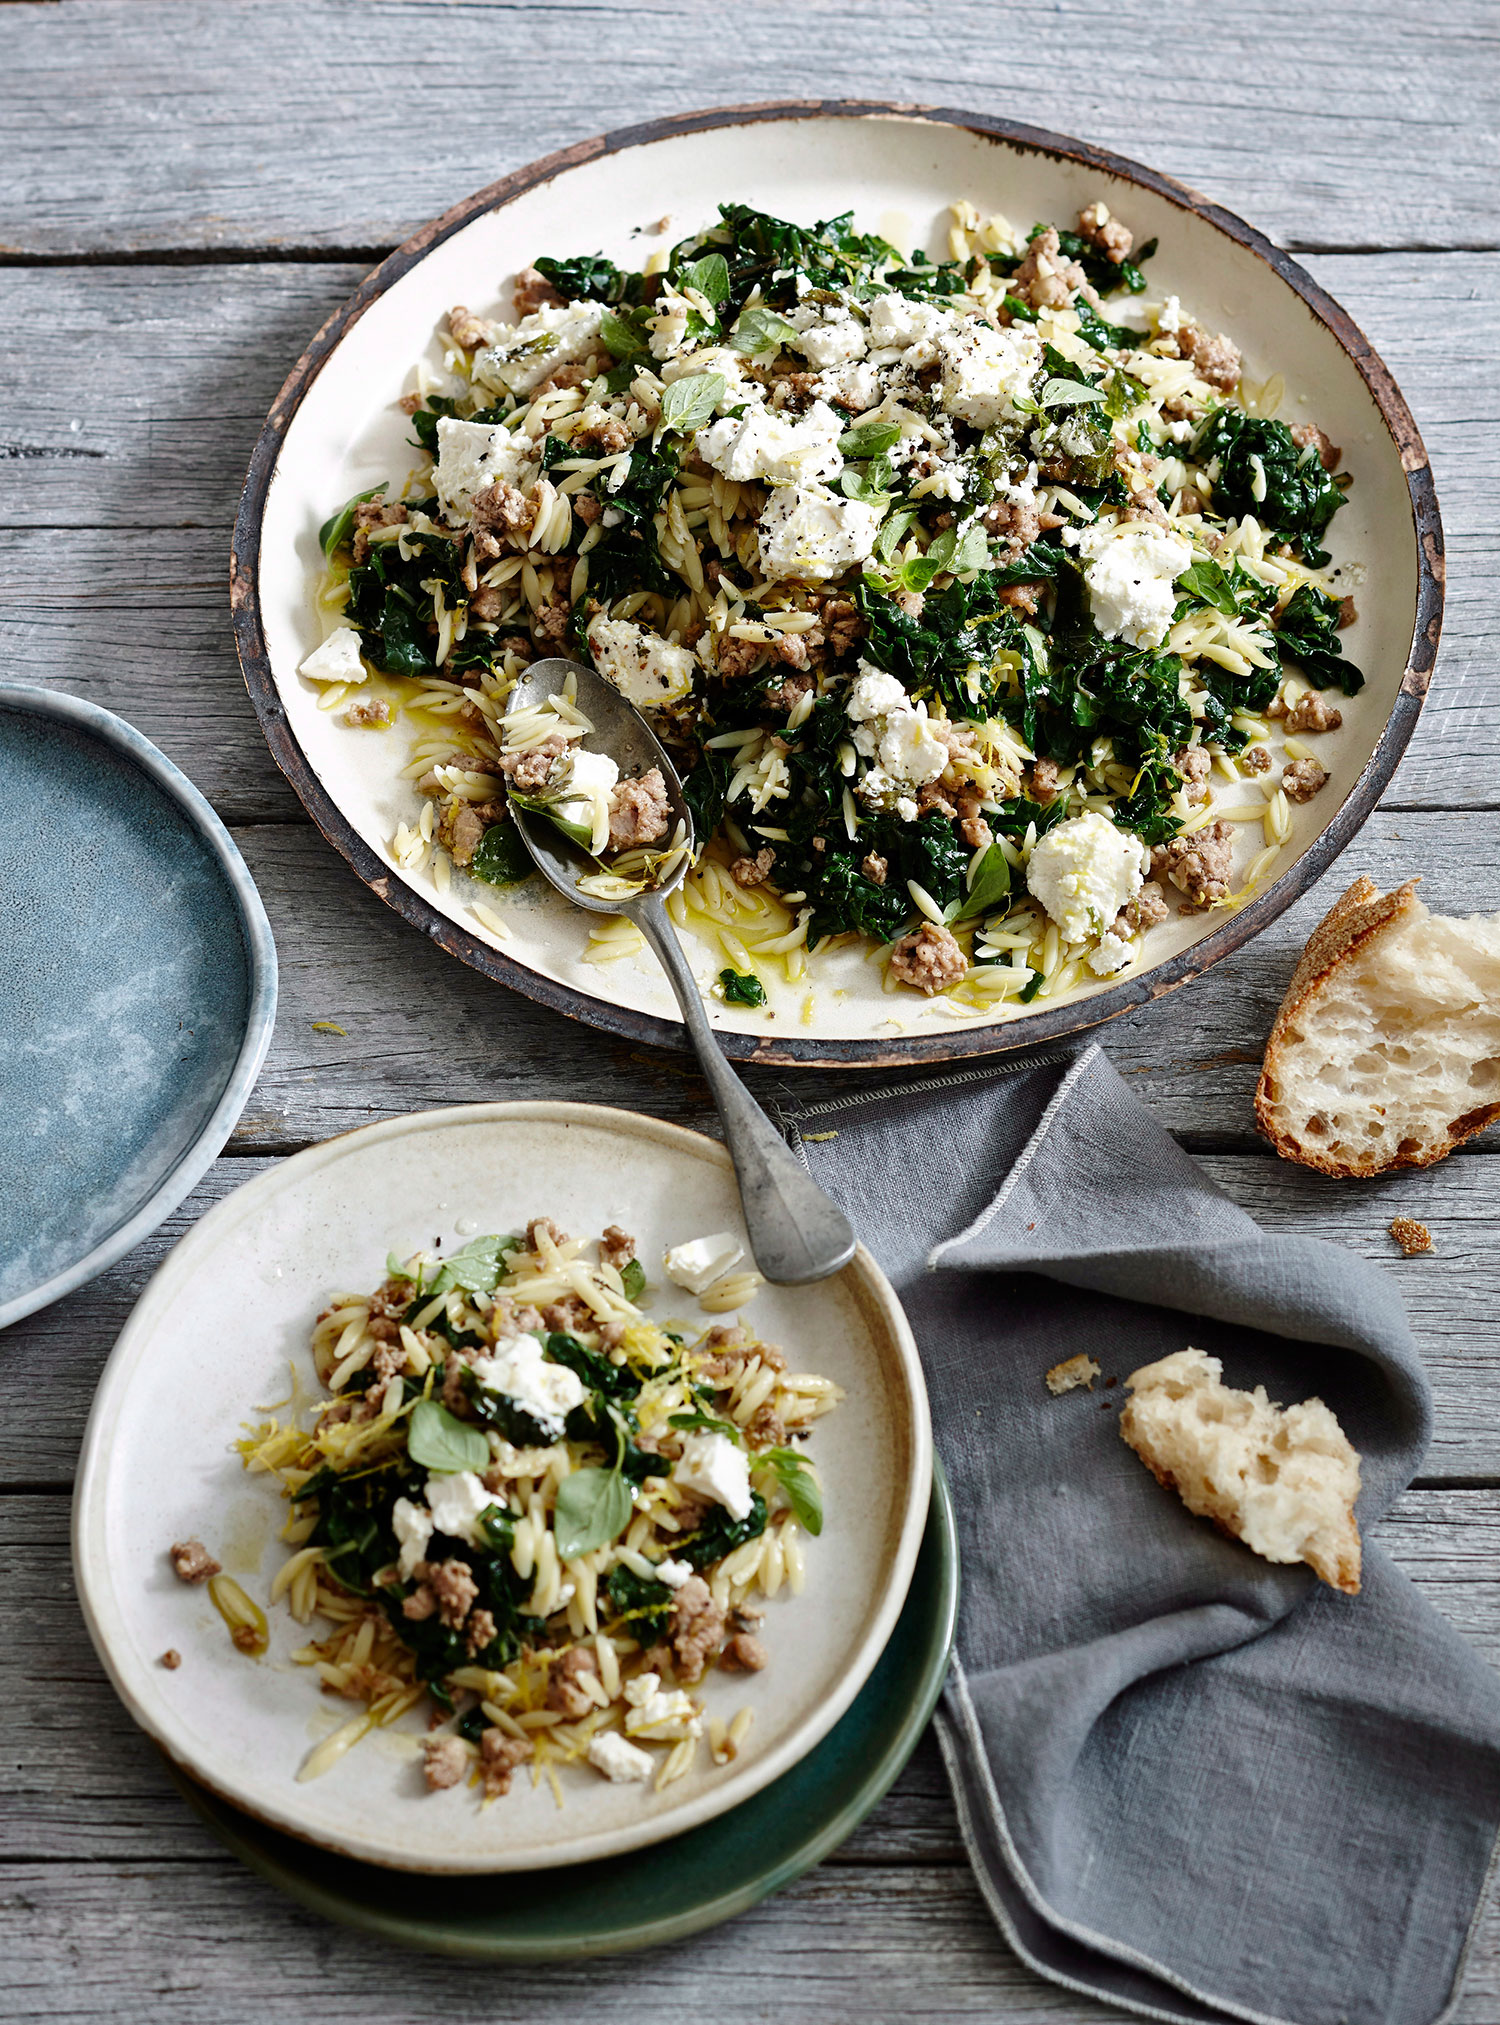 ORZO WITH PORK, SPINACH AND FETA